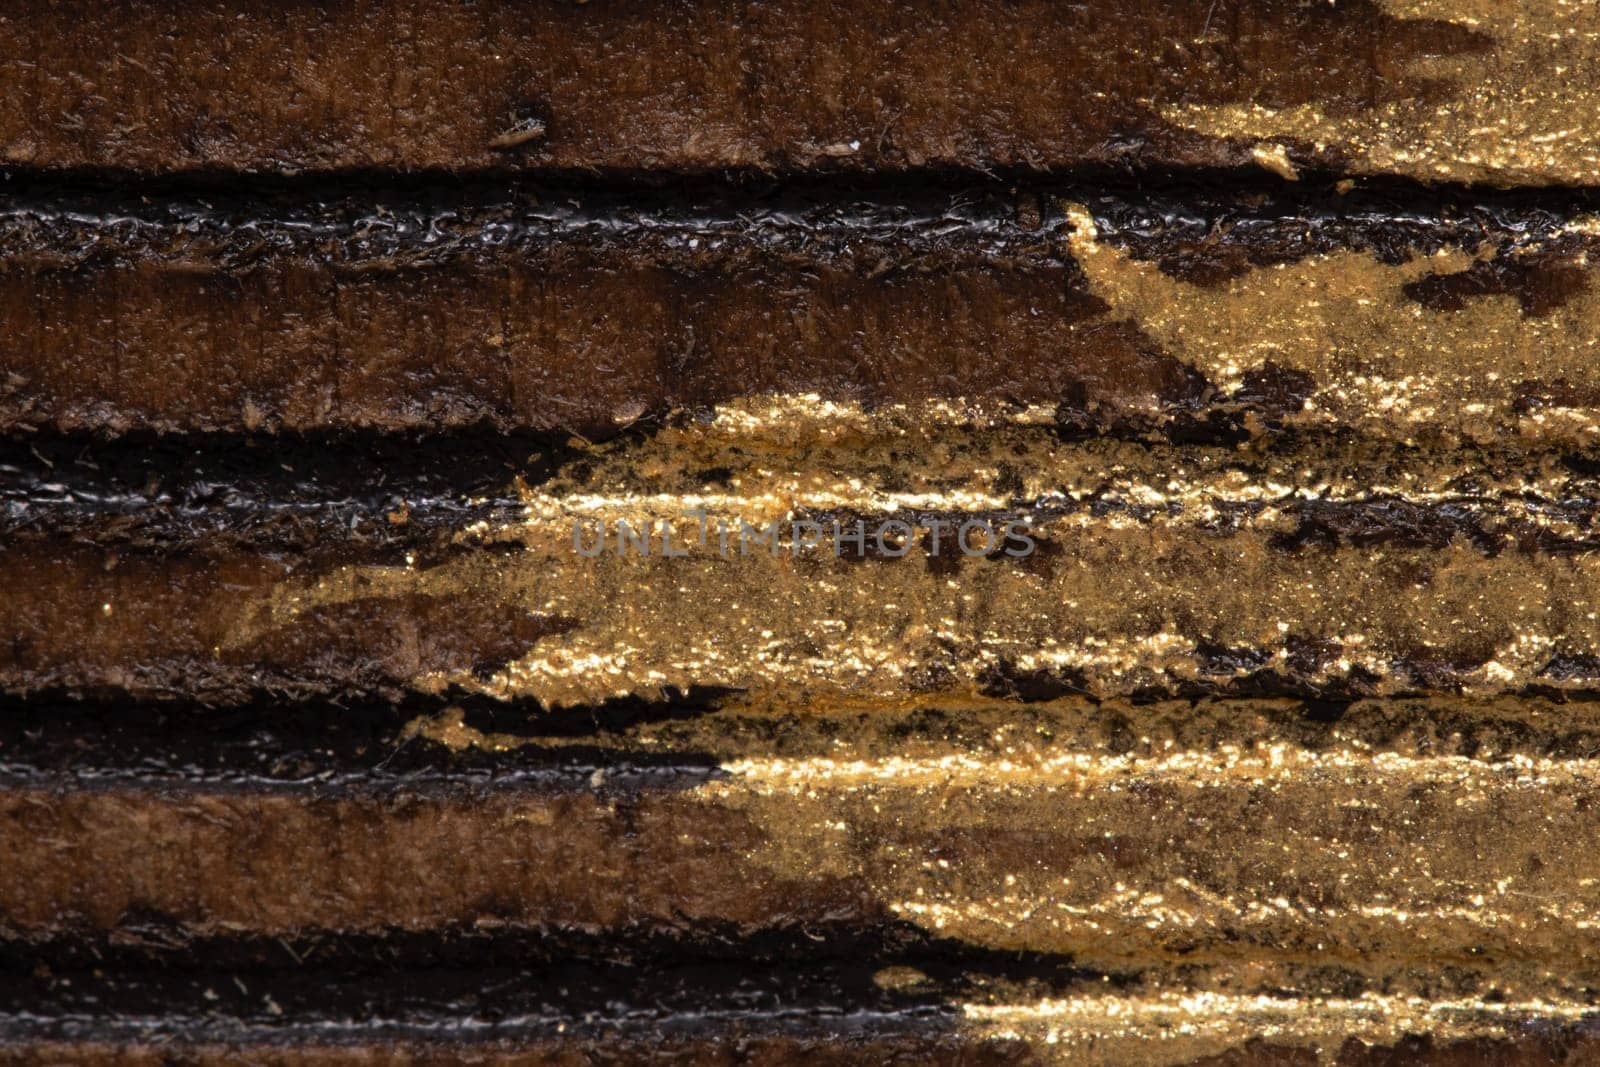 Close-Up View of Golden and Black Striped Textured Surface by clusterx